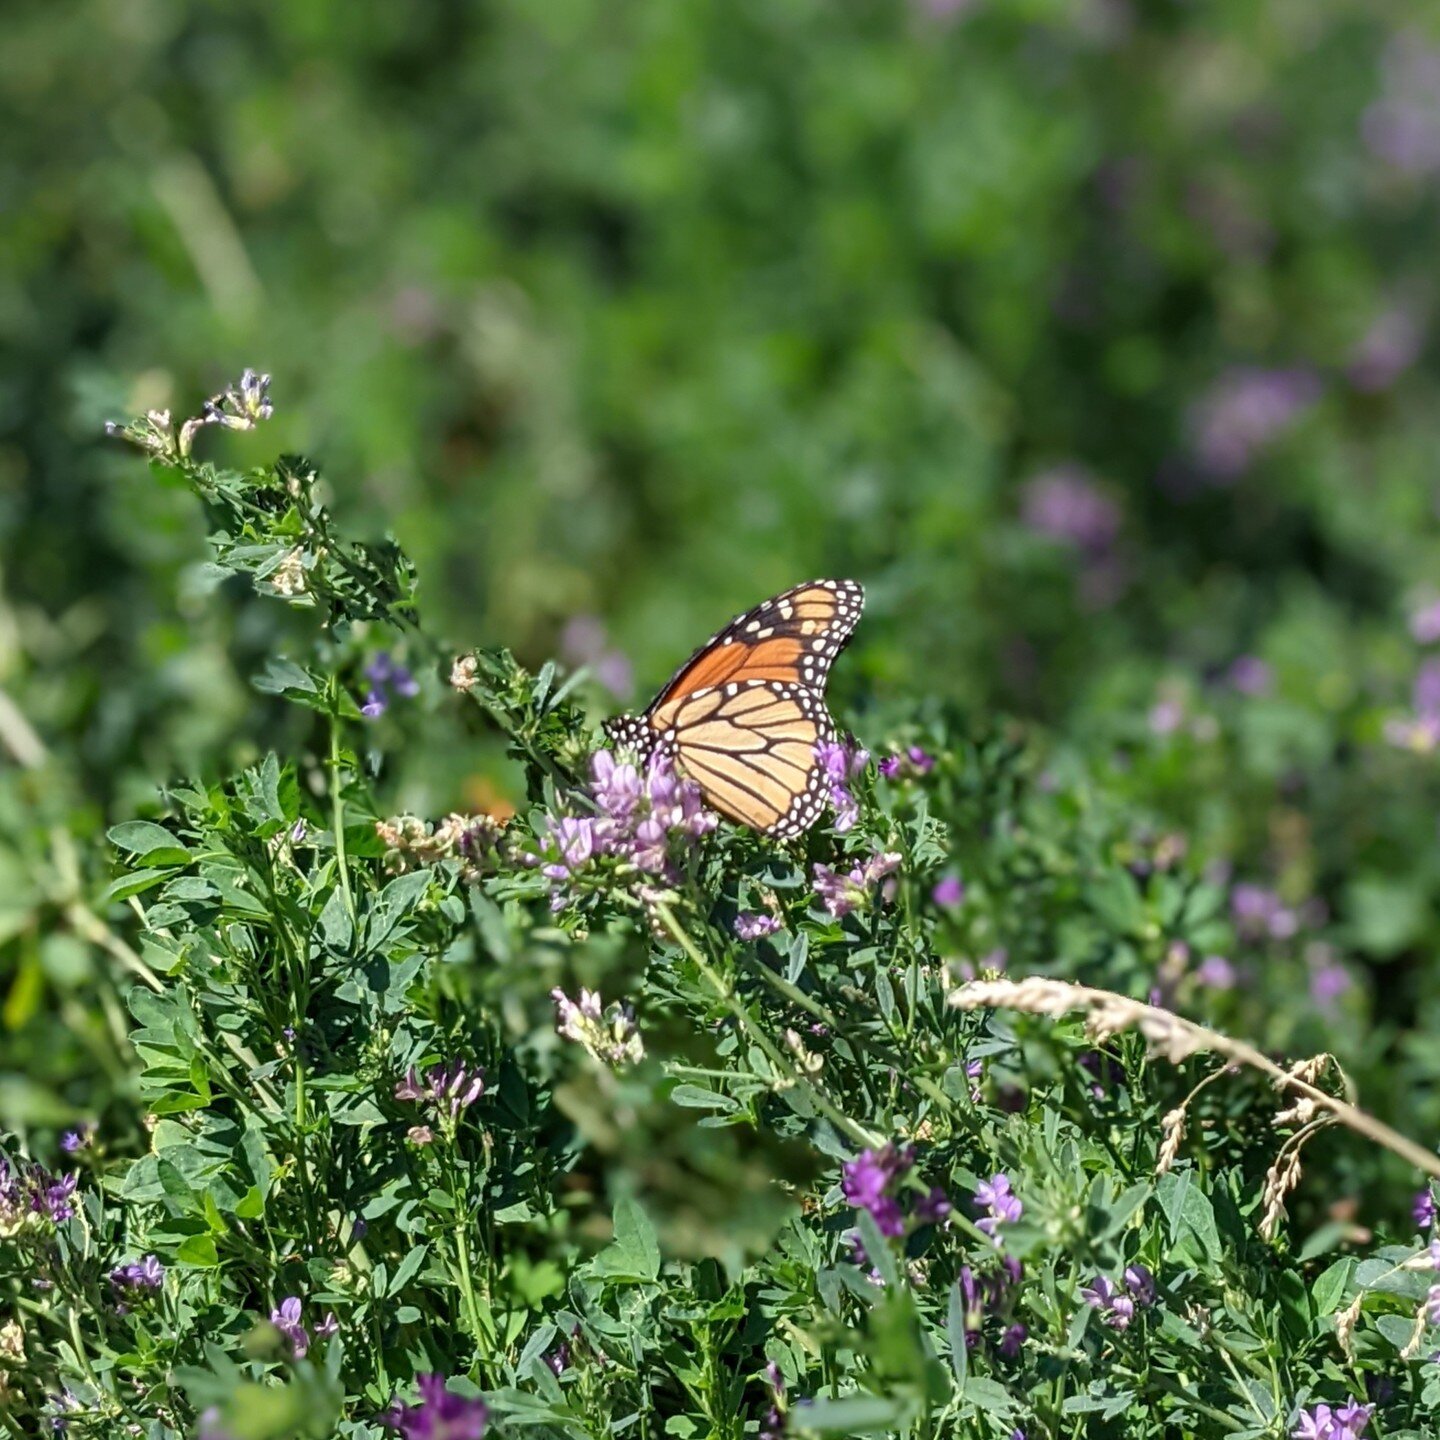 We're lucky to have several native/naturalized forest and riparian zones on the property that are chock full of plants that support bird and pollinator populations, and some (though not all!) that are good for human foraging too! As we begin to resto